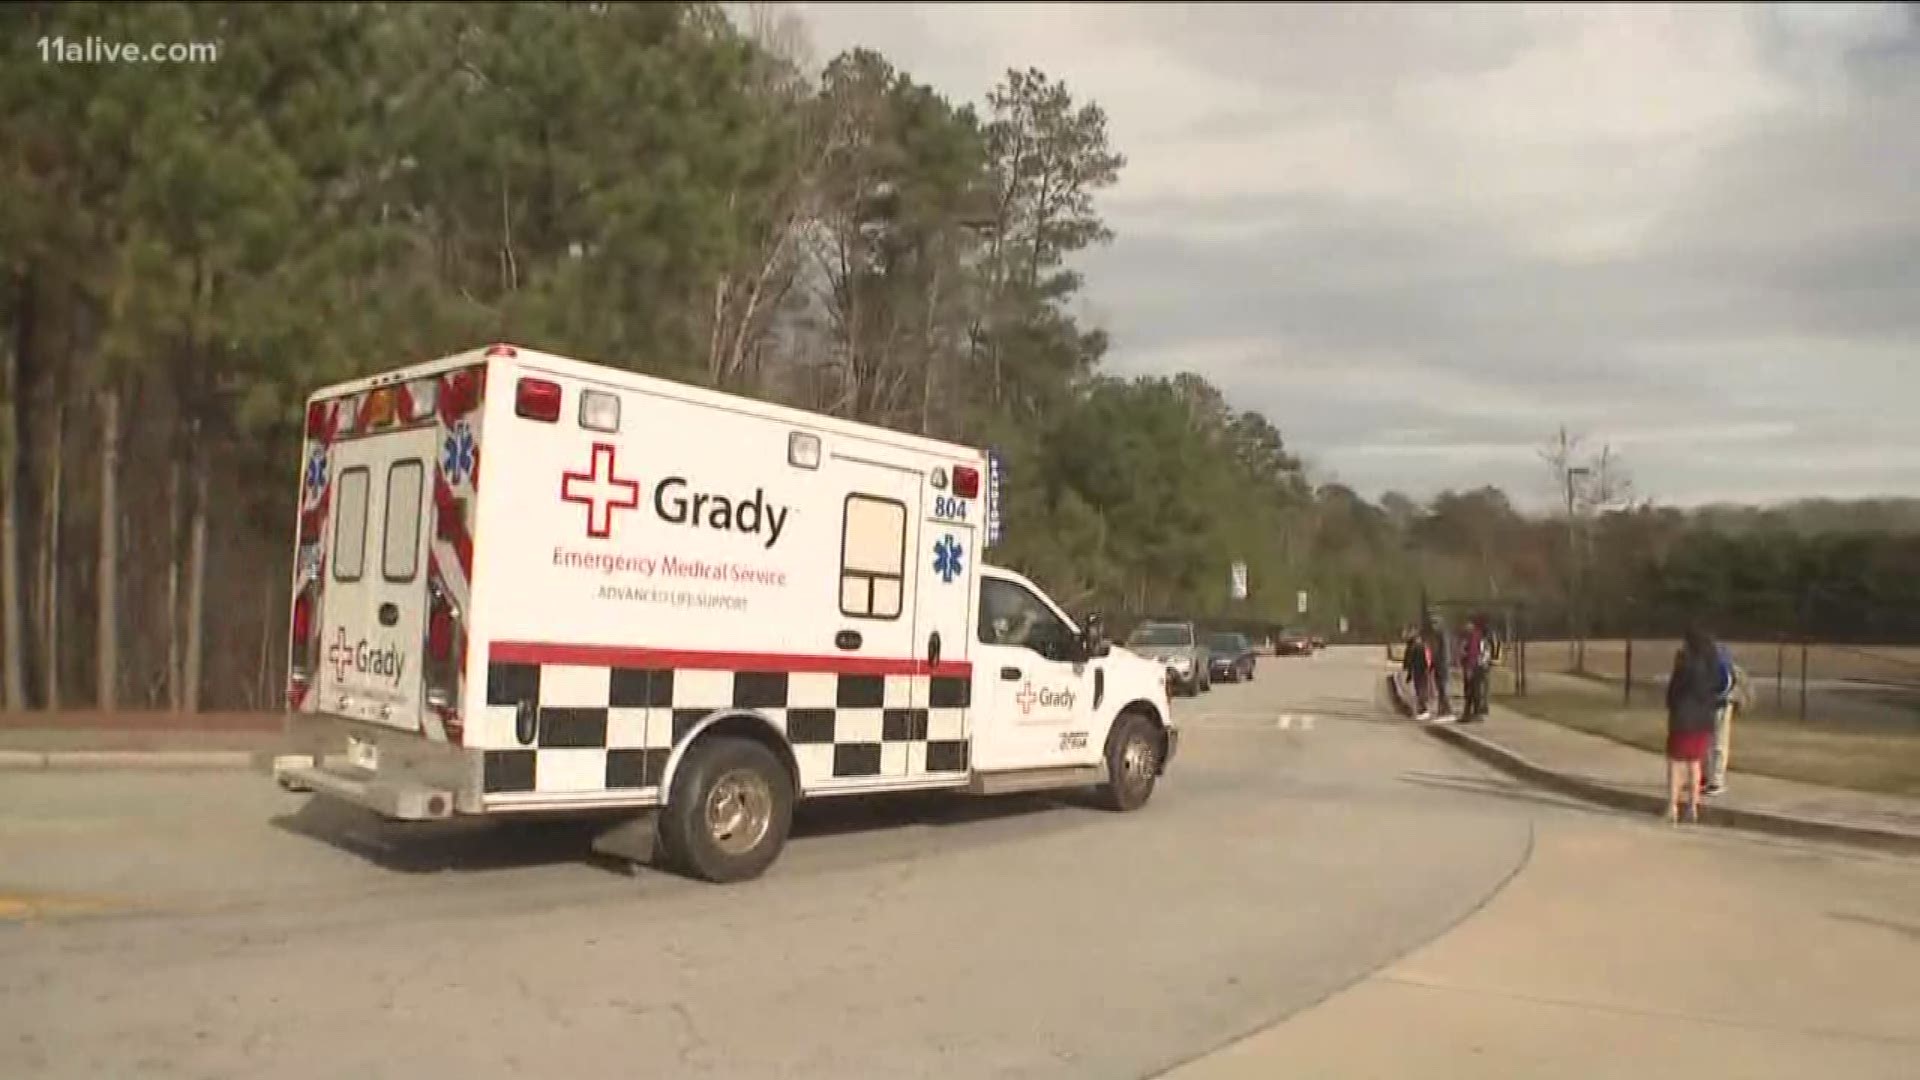 At least 28 students were taken to the hospital.